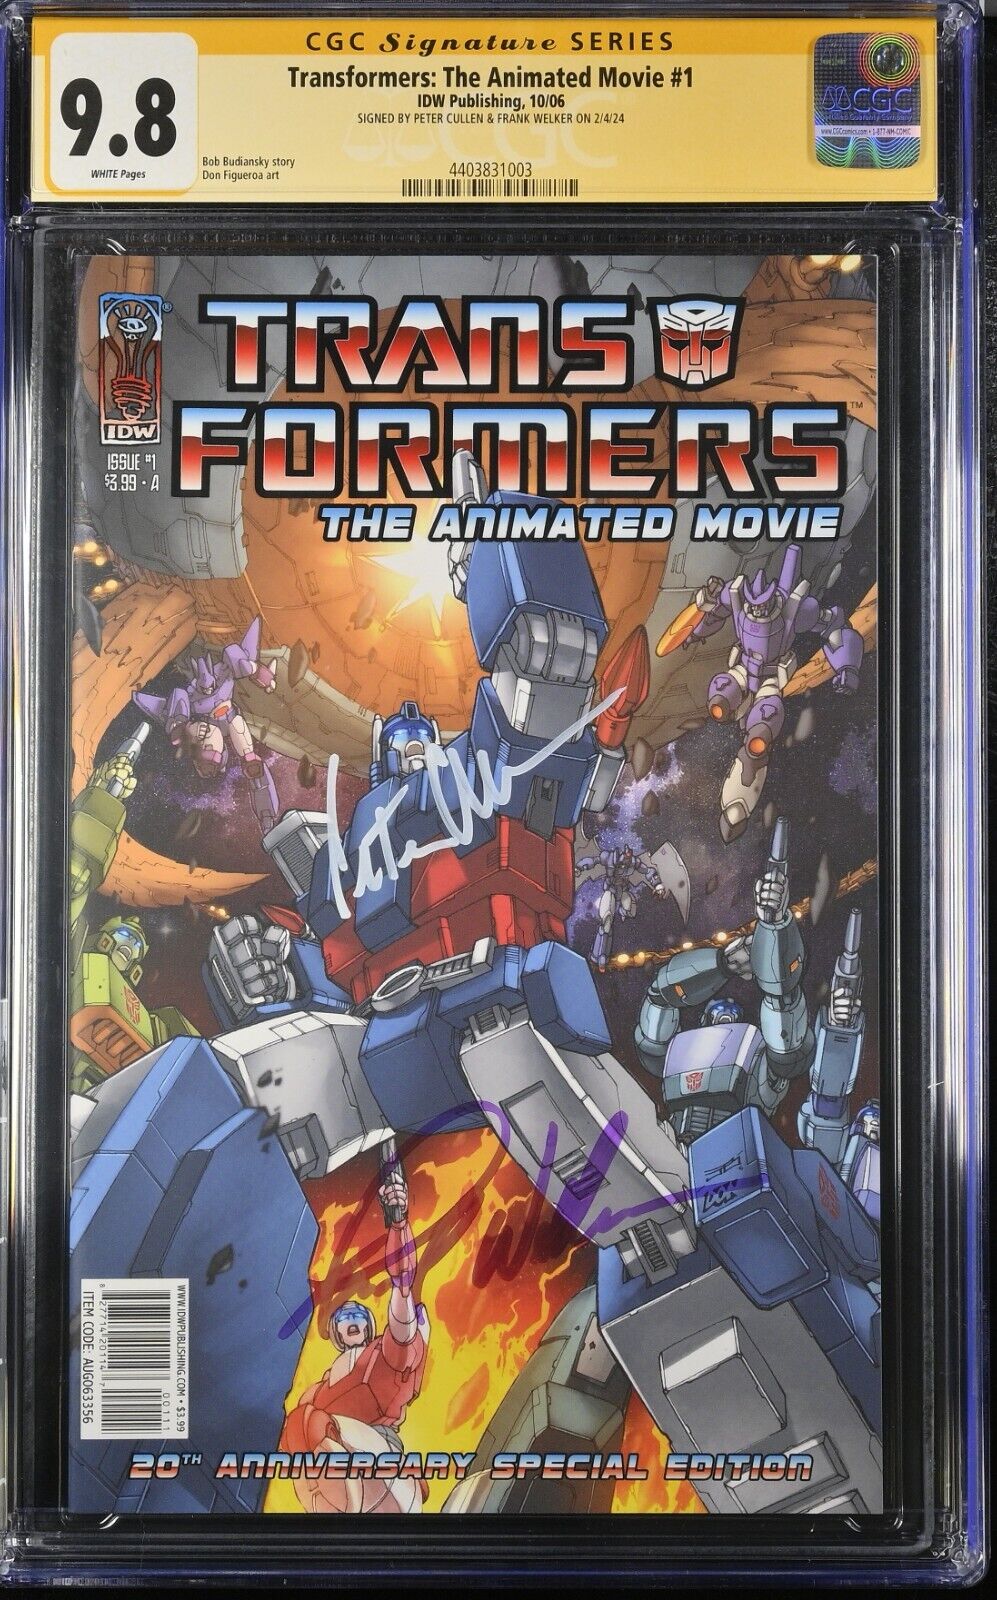 TRANSFORMERS: THE ANIMATED MOVIE 1 CGC SS 9.8 - SIGNED PETER CULLEN FRANK WELKER